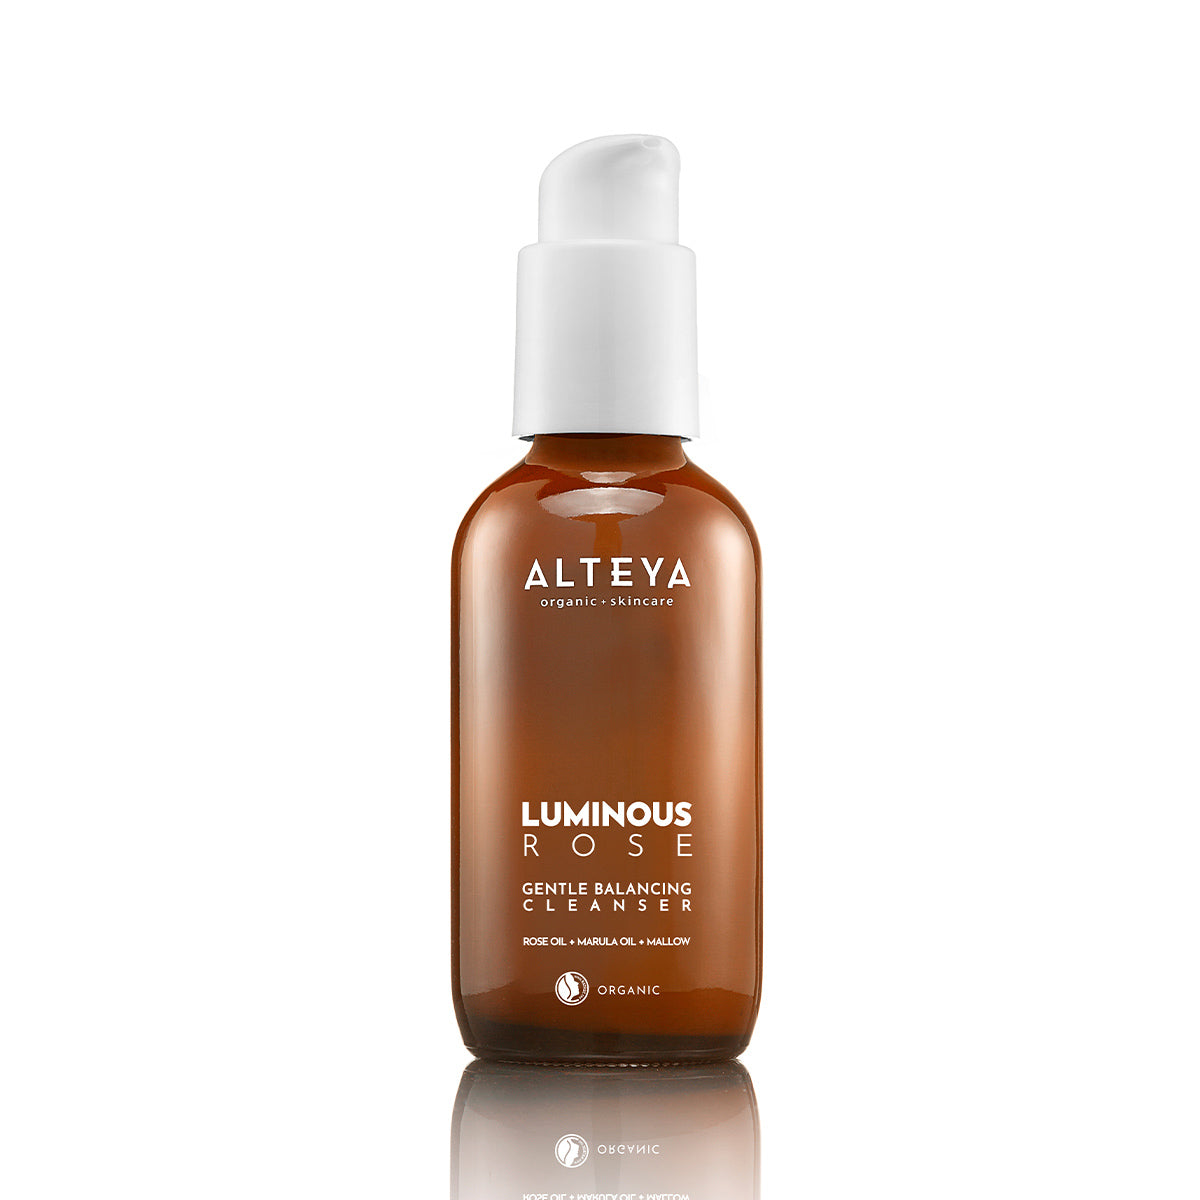 A brown bottle of Gentle Balancing Cleanser Luminous Rose with a white pump on top.